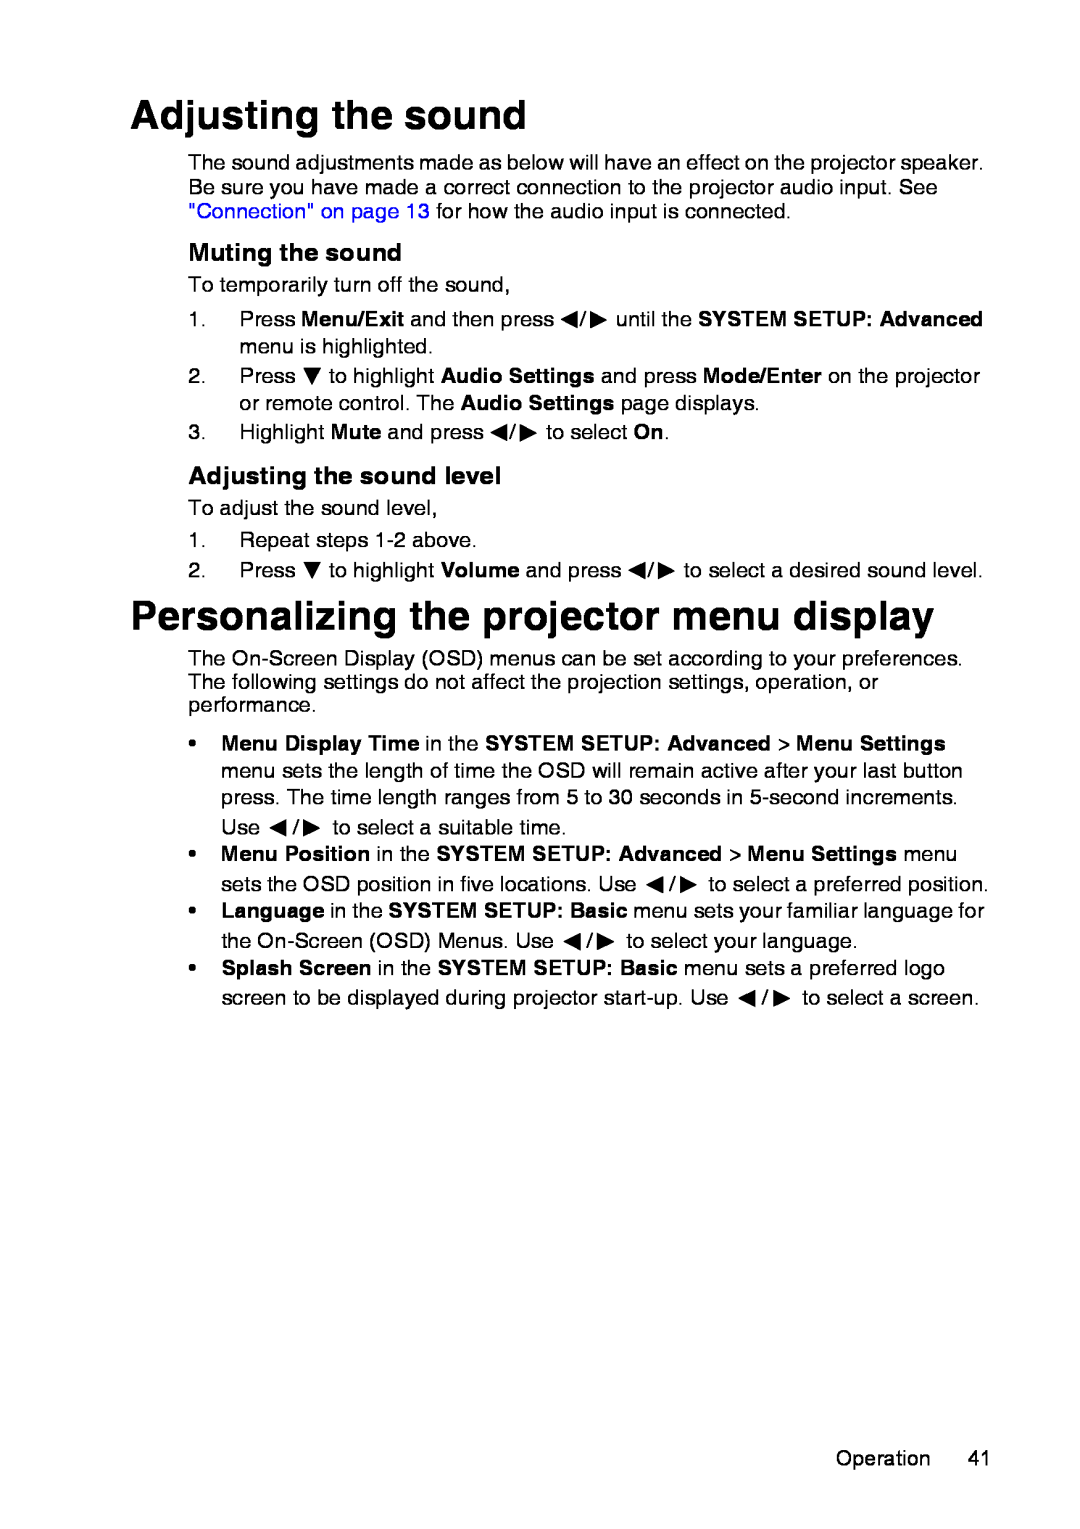 InFocus XS1 manual Personalizing the projector menu display, Muting the sound, Adjusting the sound level 